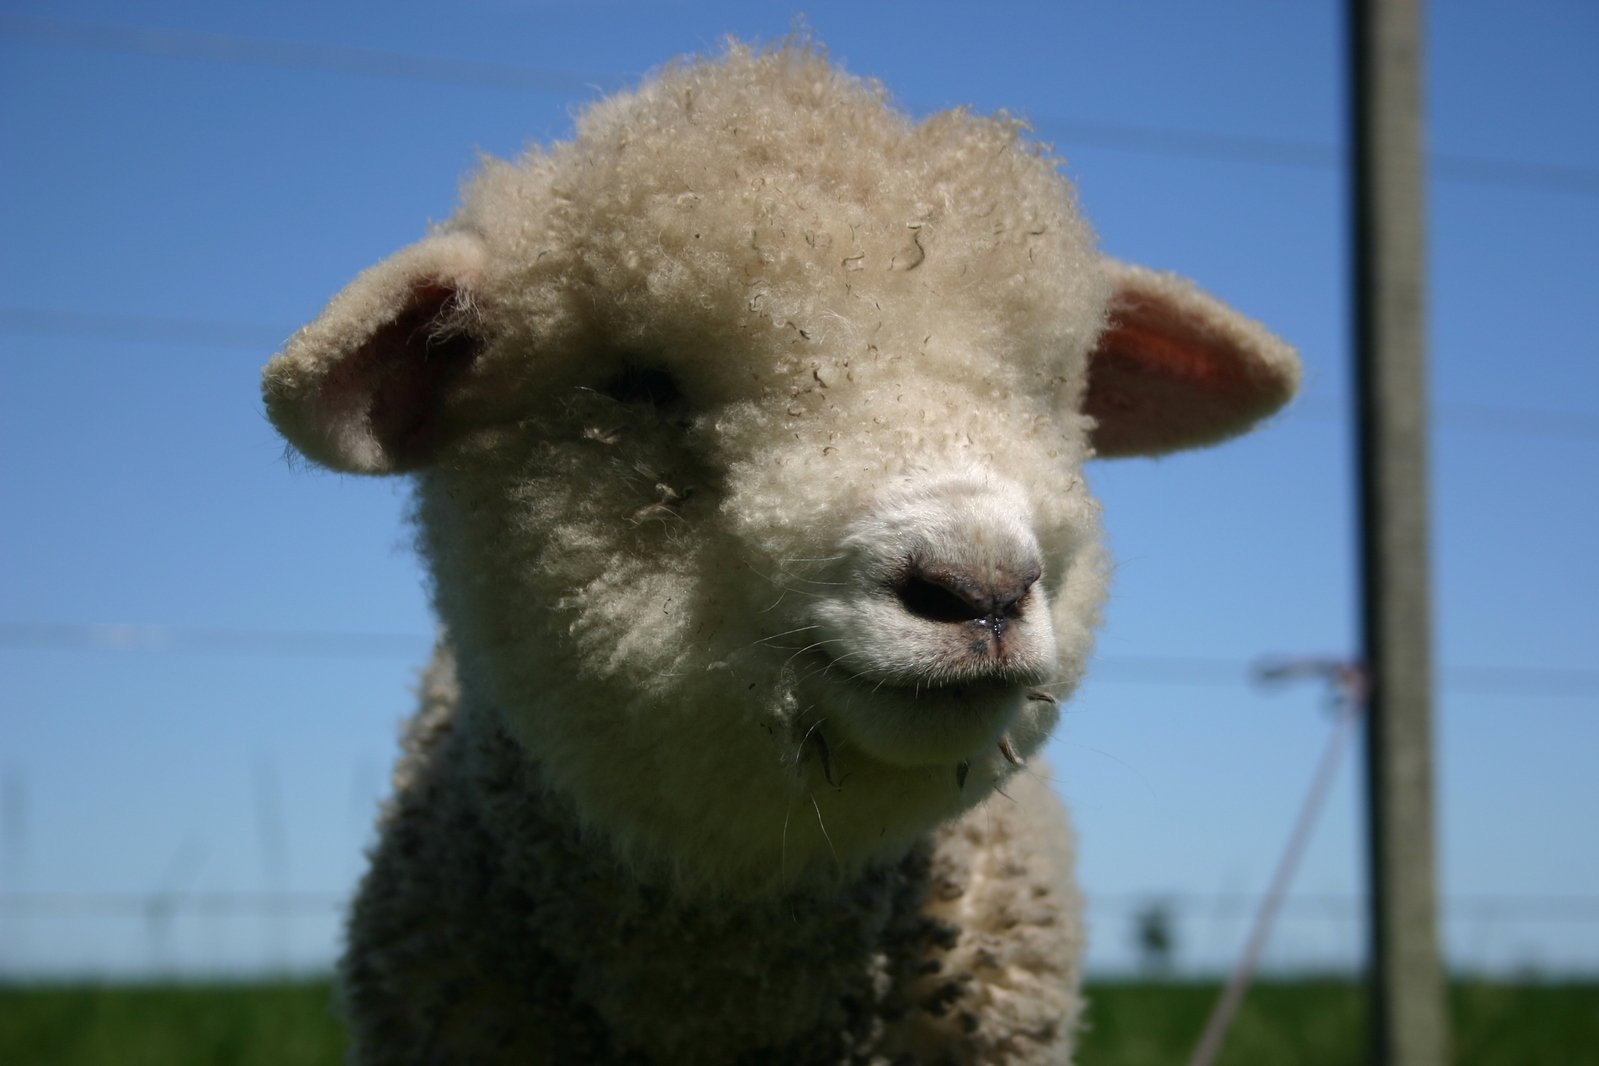 a lamb looking at the camera in a grass field